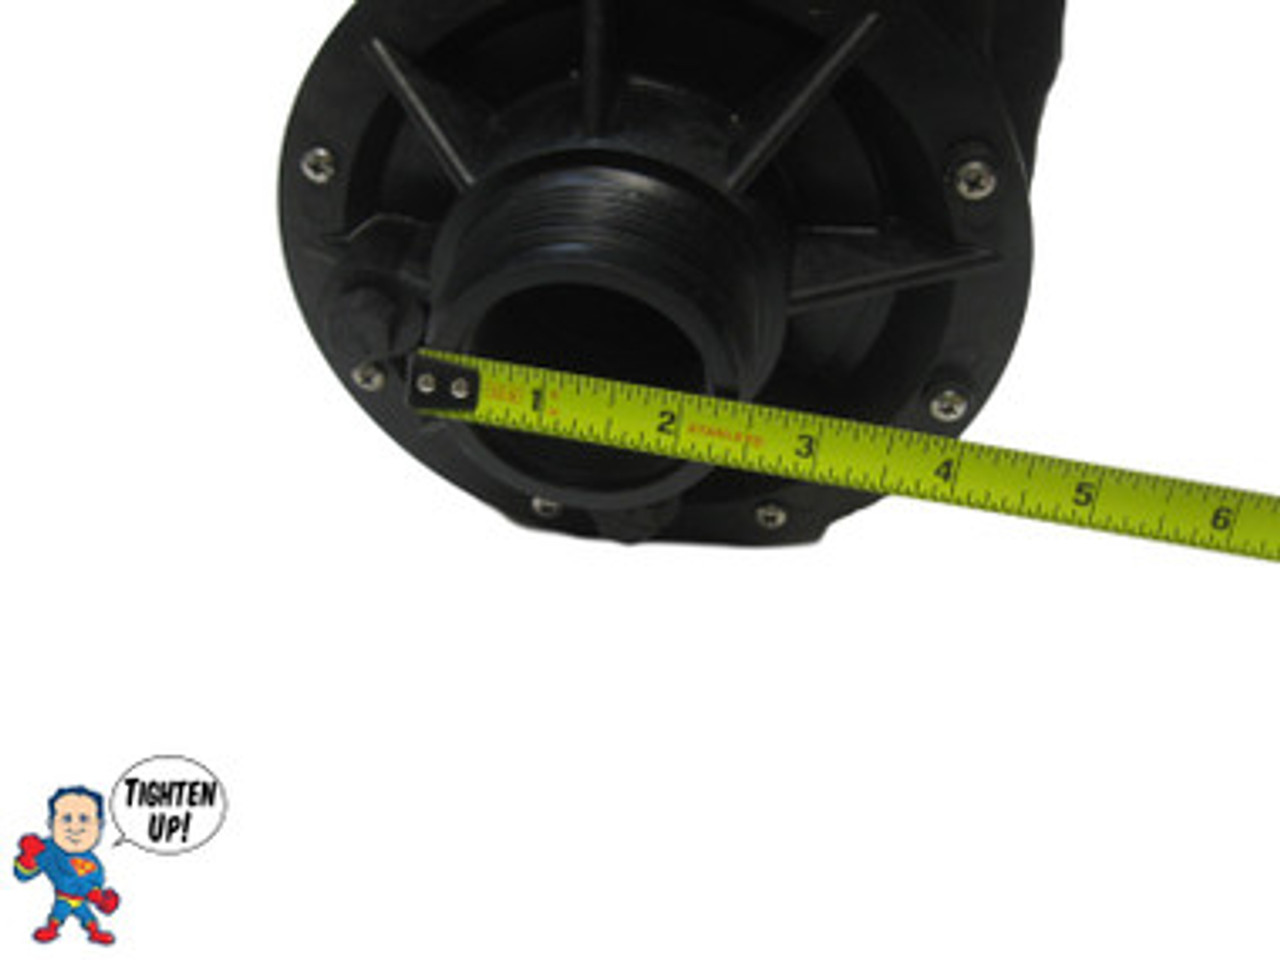 The inlet and outlet measure about 2 5/16" across the threads..
Wavemaster 3000, 39584, 34677, 04184, Complete Pump, 1.0HP, 115v, 48fr, 1-1/2", 1 or 2 Speed